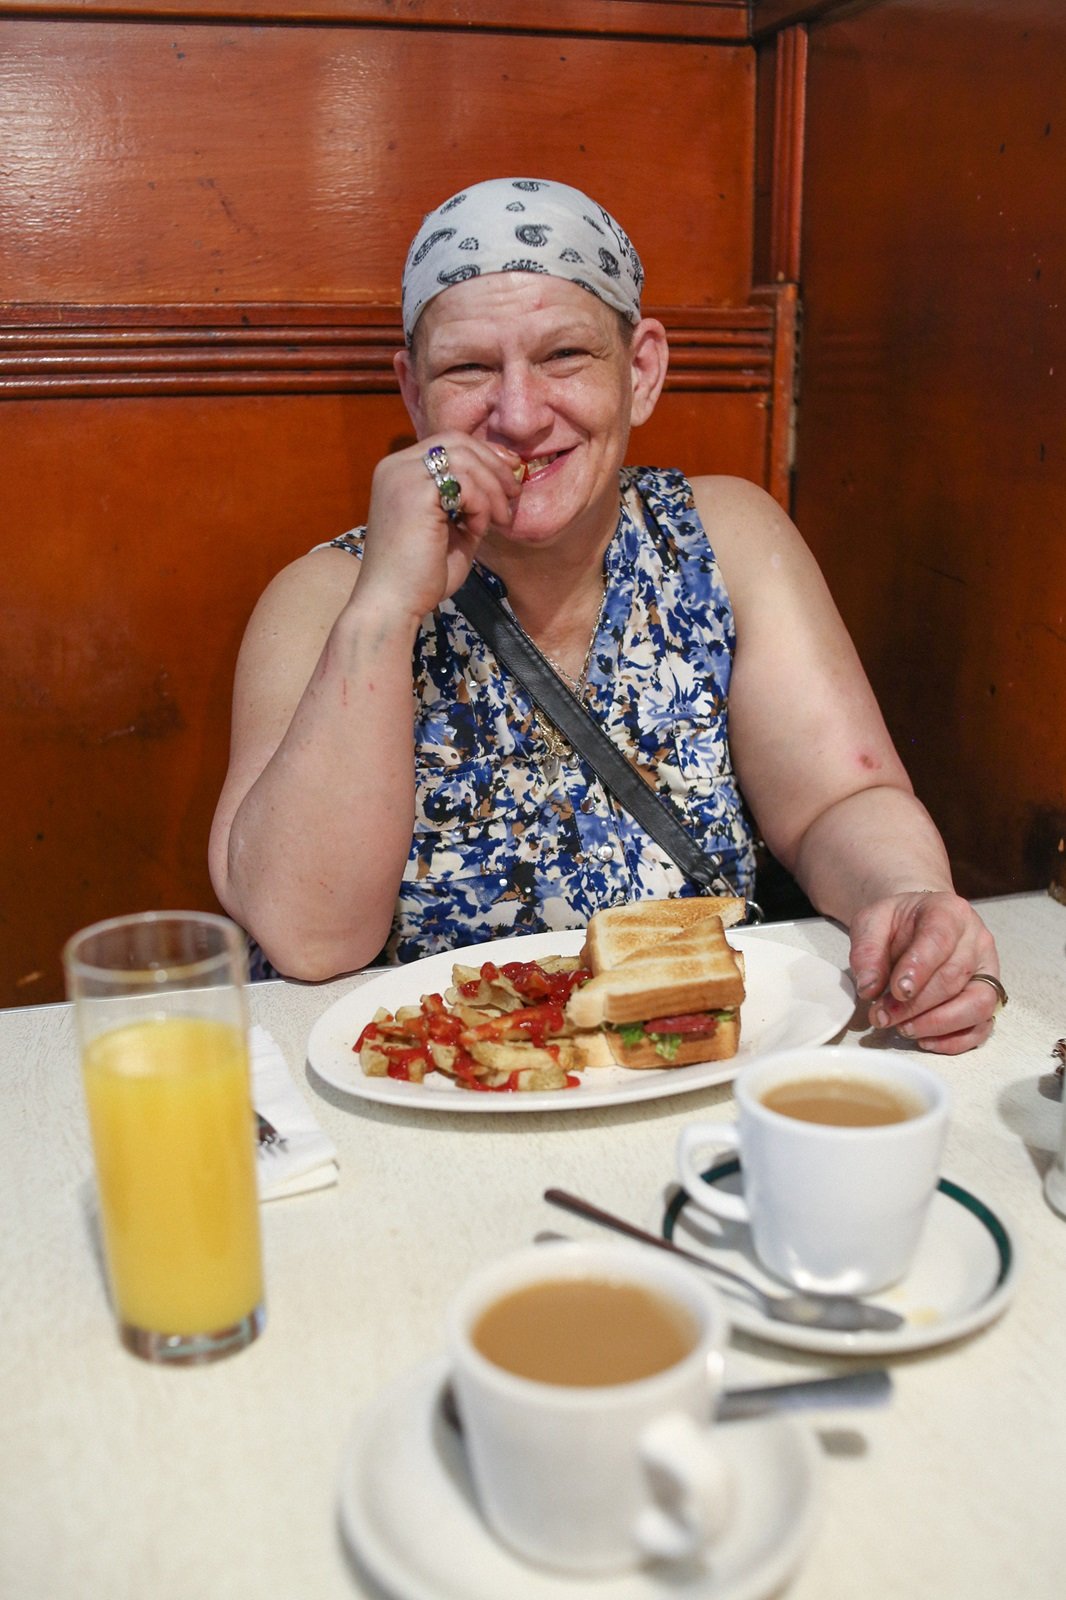 A woman with light skin, a light blue patterned bandana and a sleeveless blue and white floral top sits against a warm wood fixture at a diner table spread with small white coffee cups, an orange juice and a plate with a sandwich and salad.